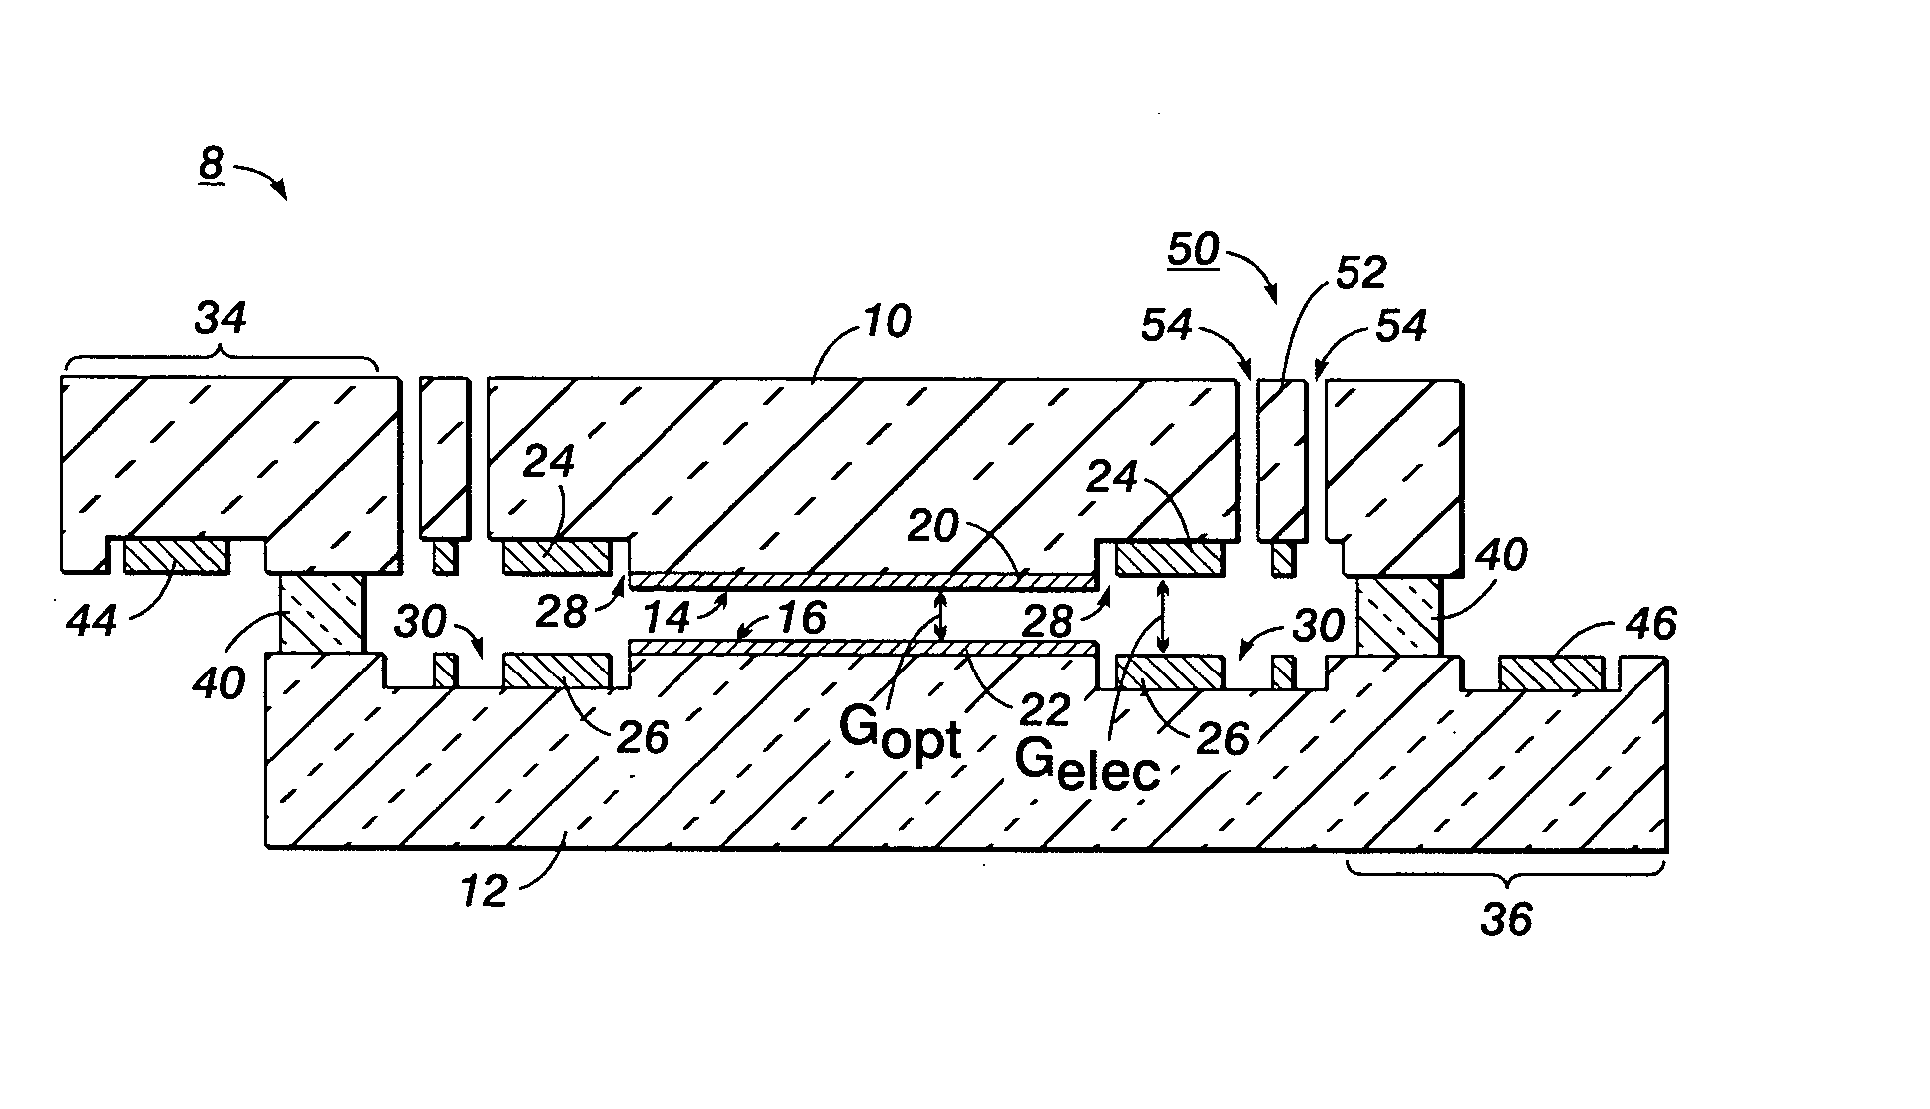 Fabry-Perot tunable filter using a bonded pair of transparent substrates